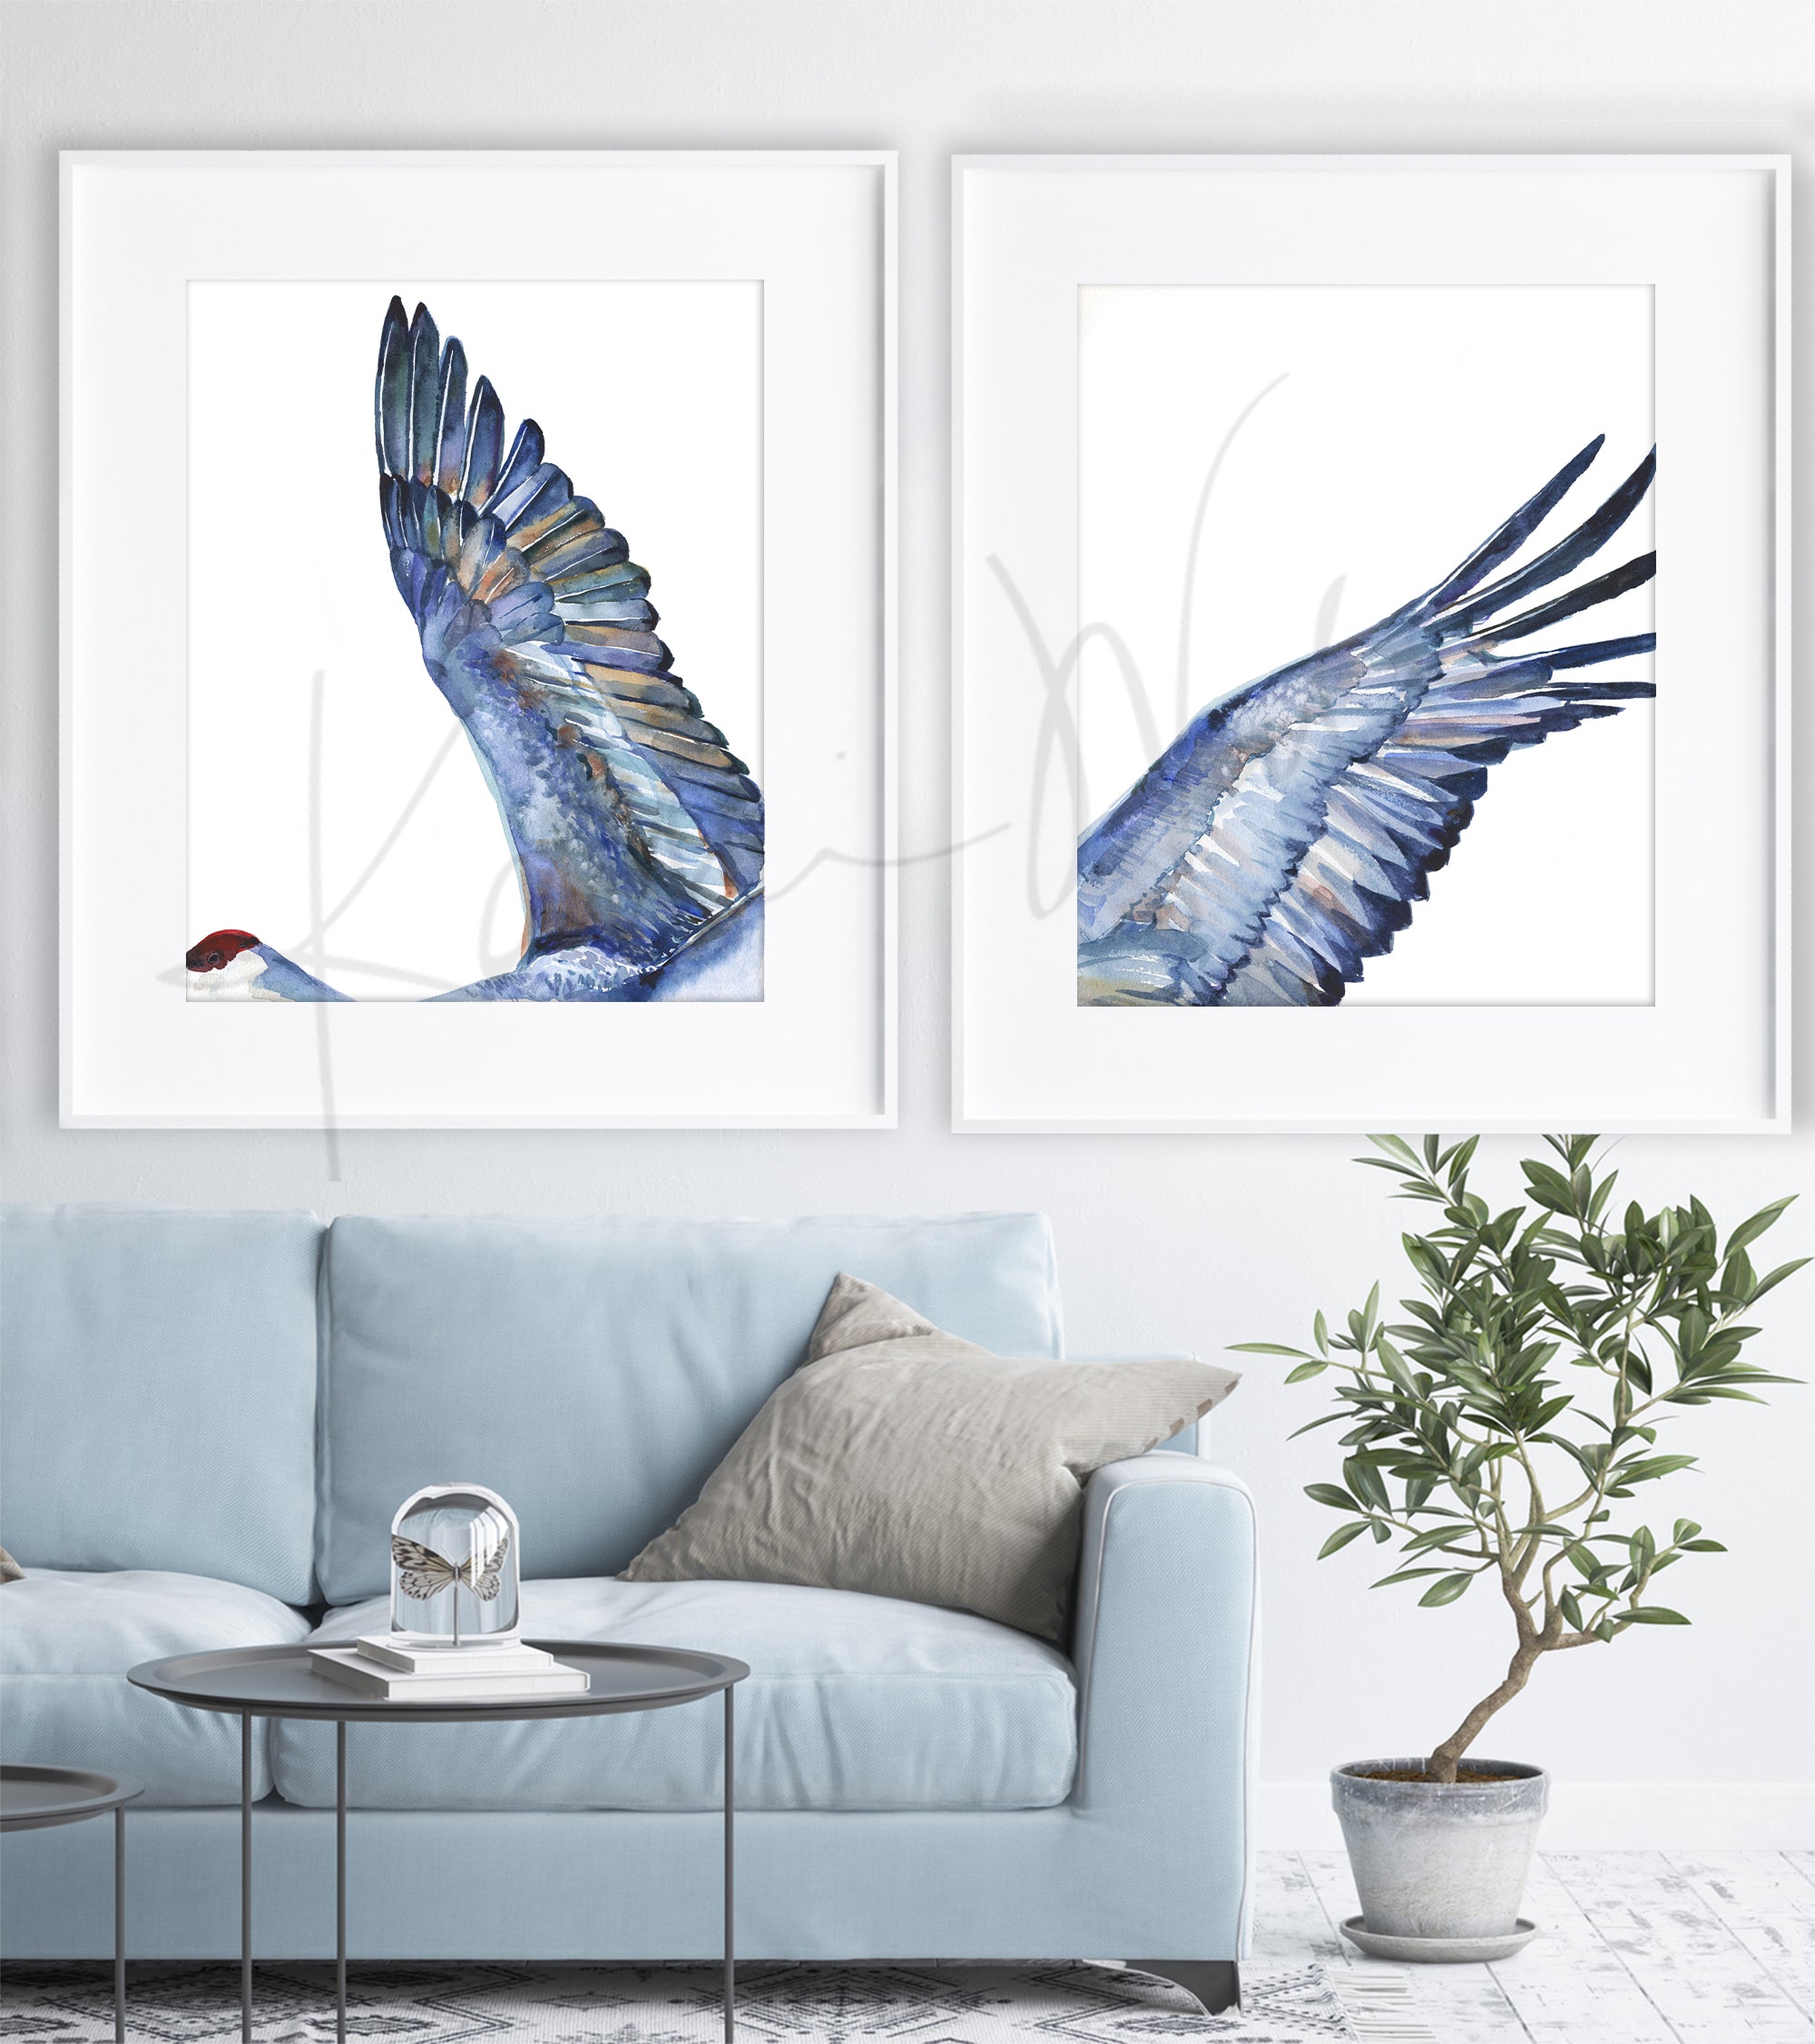  Framed watercolor diptych of a crane's wings. The paintings are hanging over a blue couch.